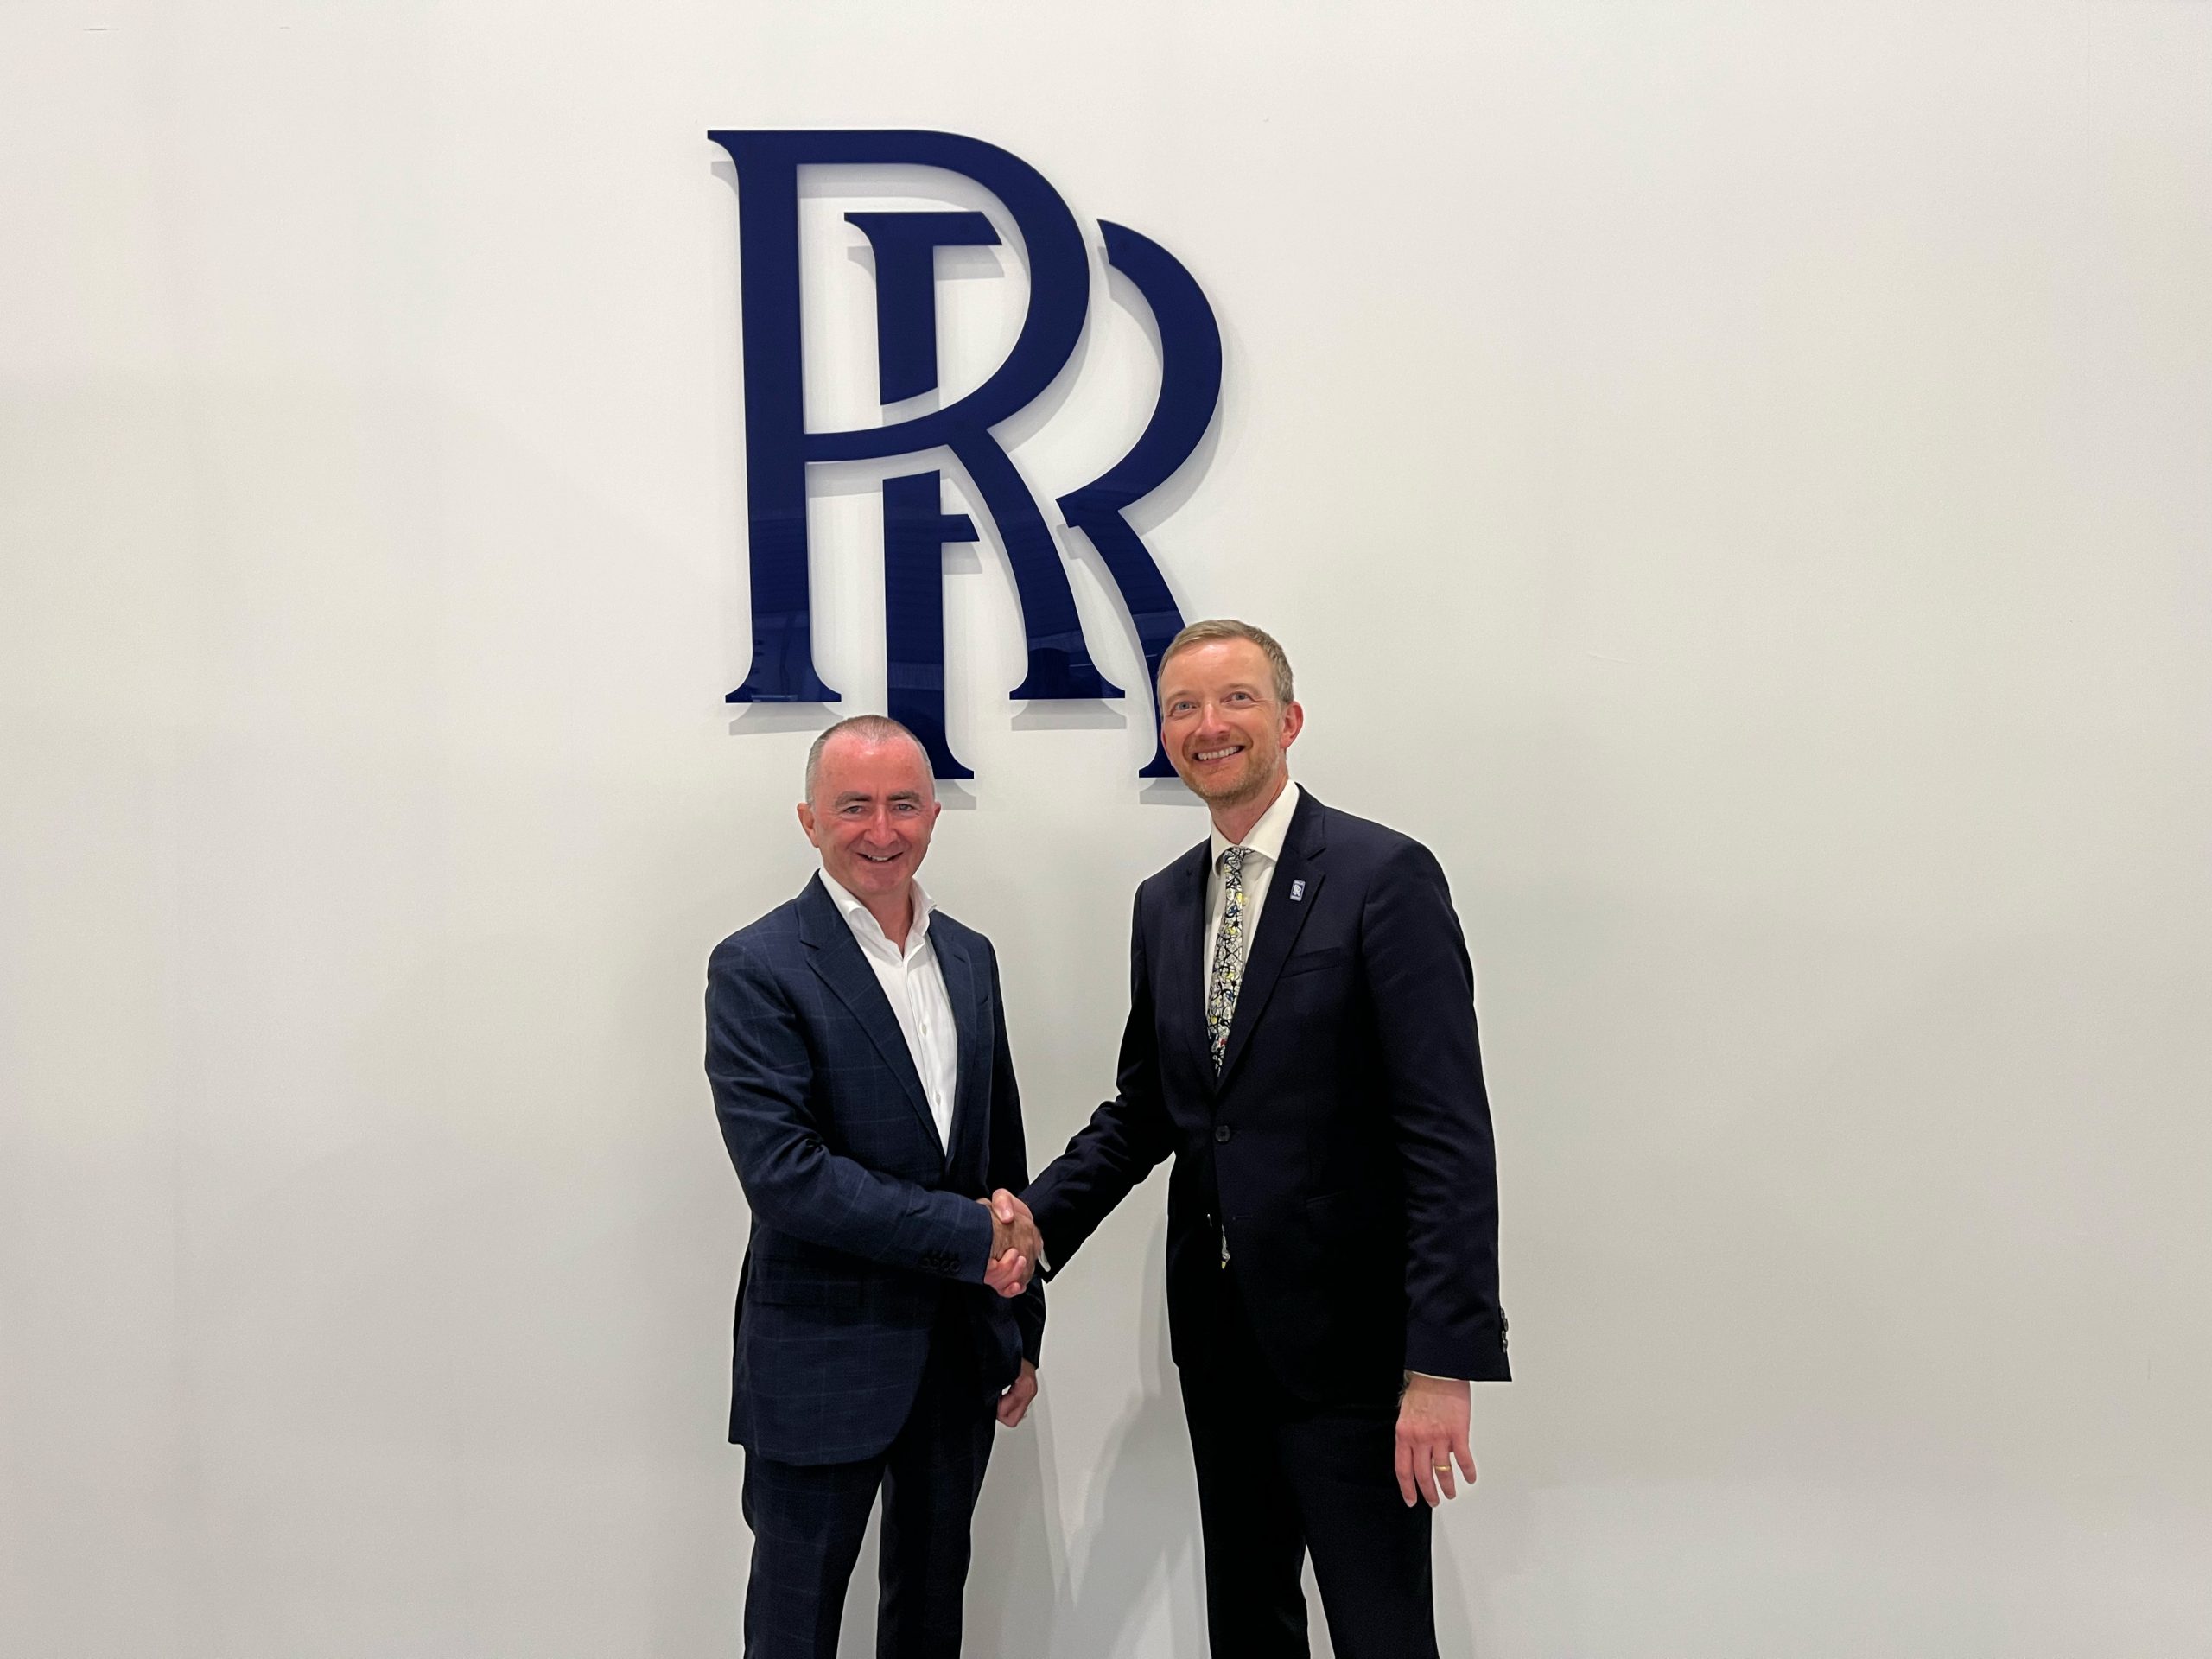 Zero & Rolls-Royce join forces to develop synthetic fuelled future